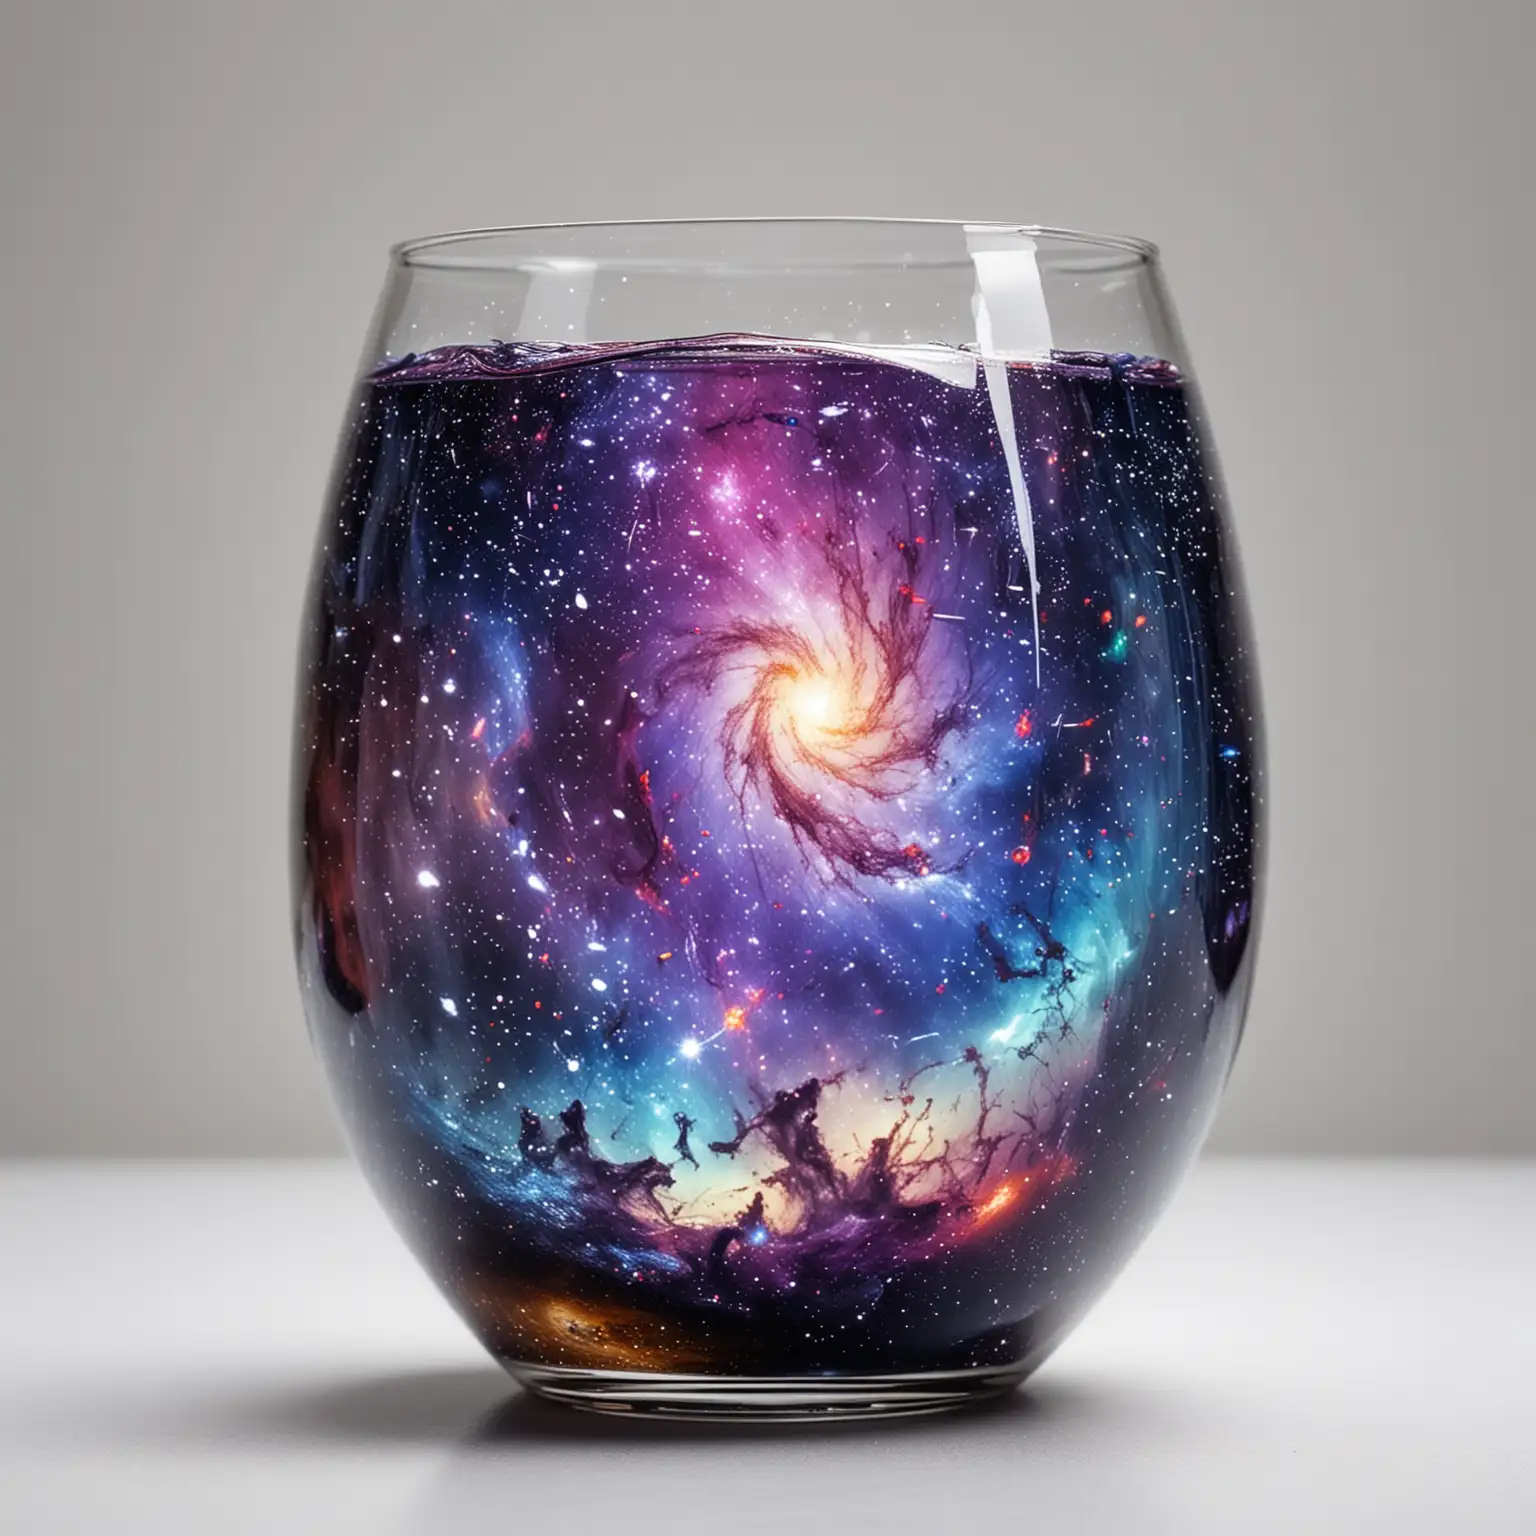 Galaxy-Inside-a-Glass-Ethereal-Cosmic-Scene-on-White-Background